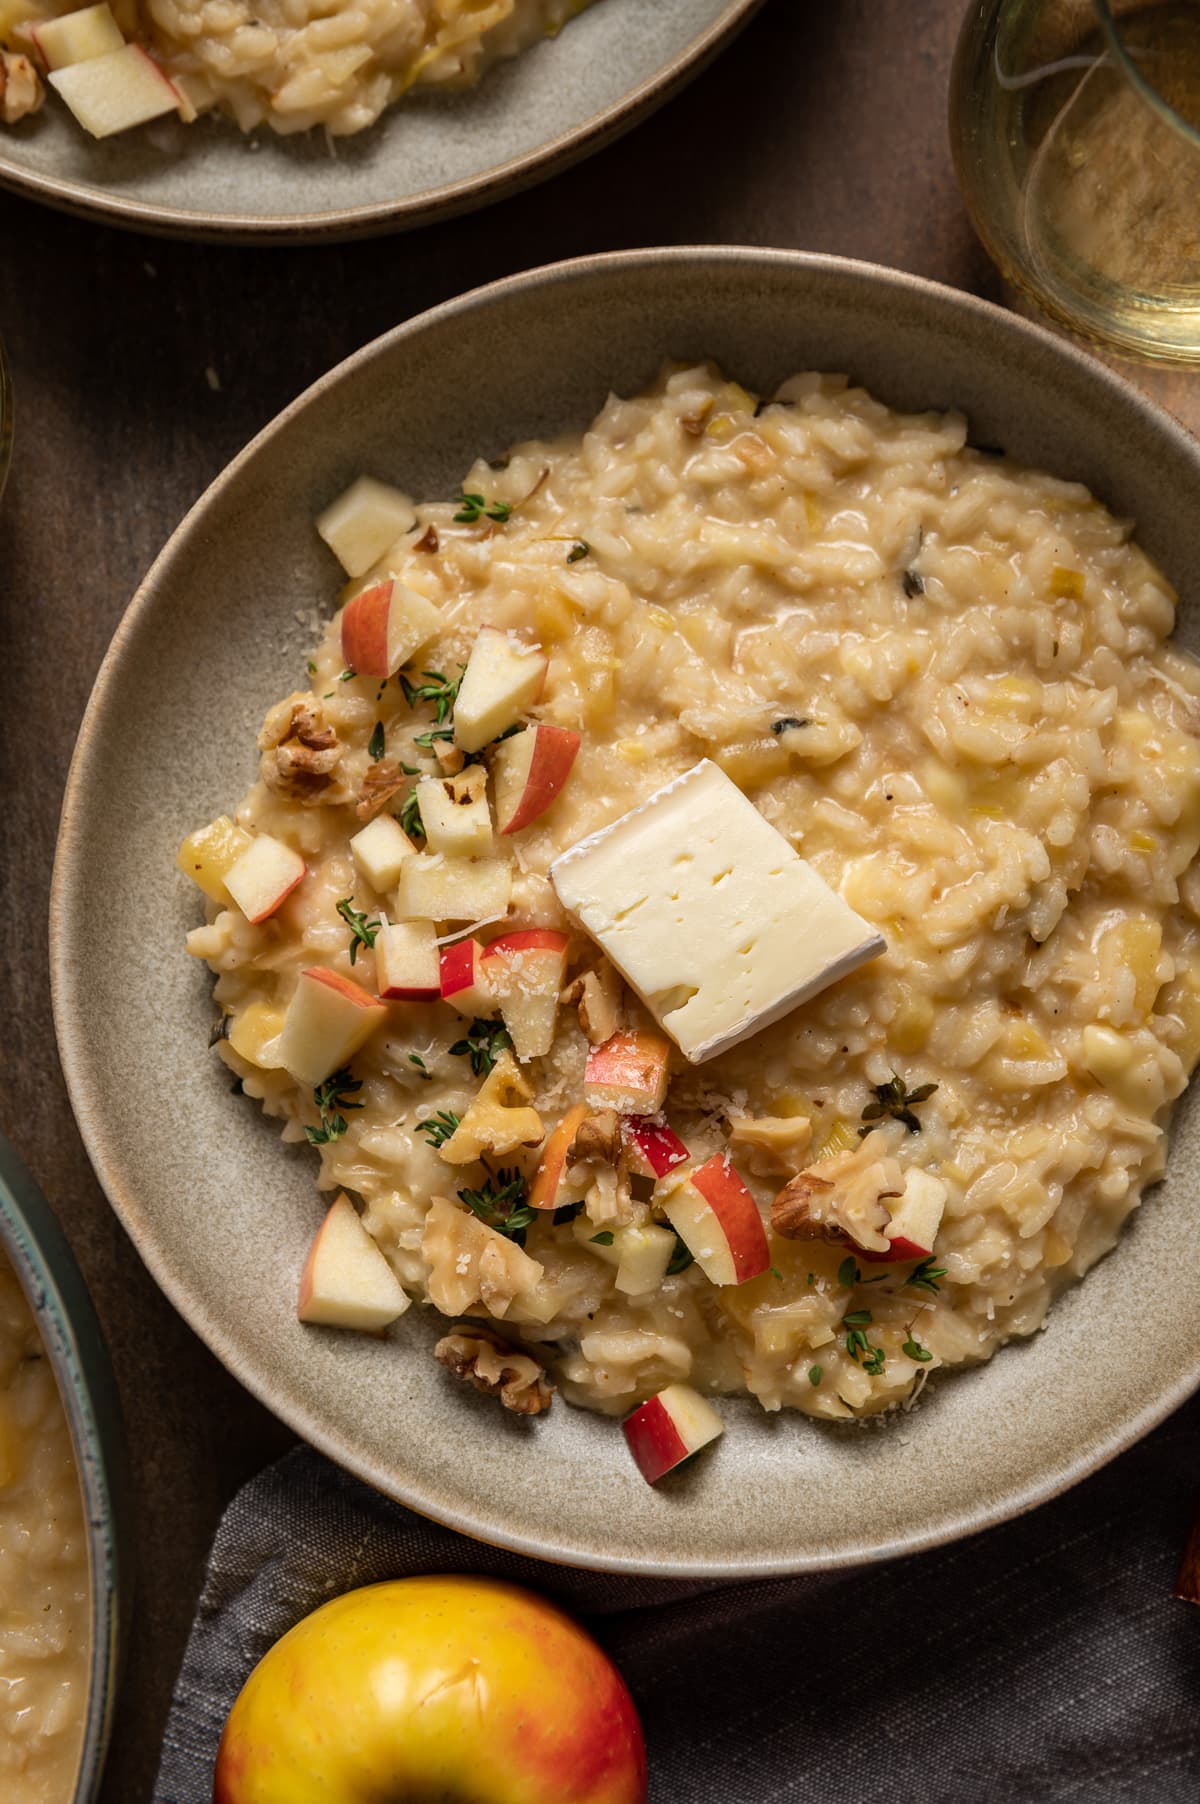 beige bowl with yellow brie risotto with apple pieces walnut pieces a wedge of brie cheese